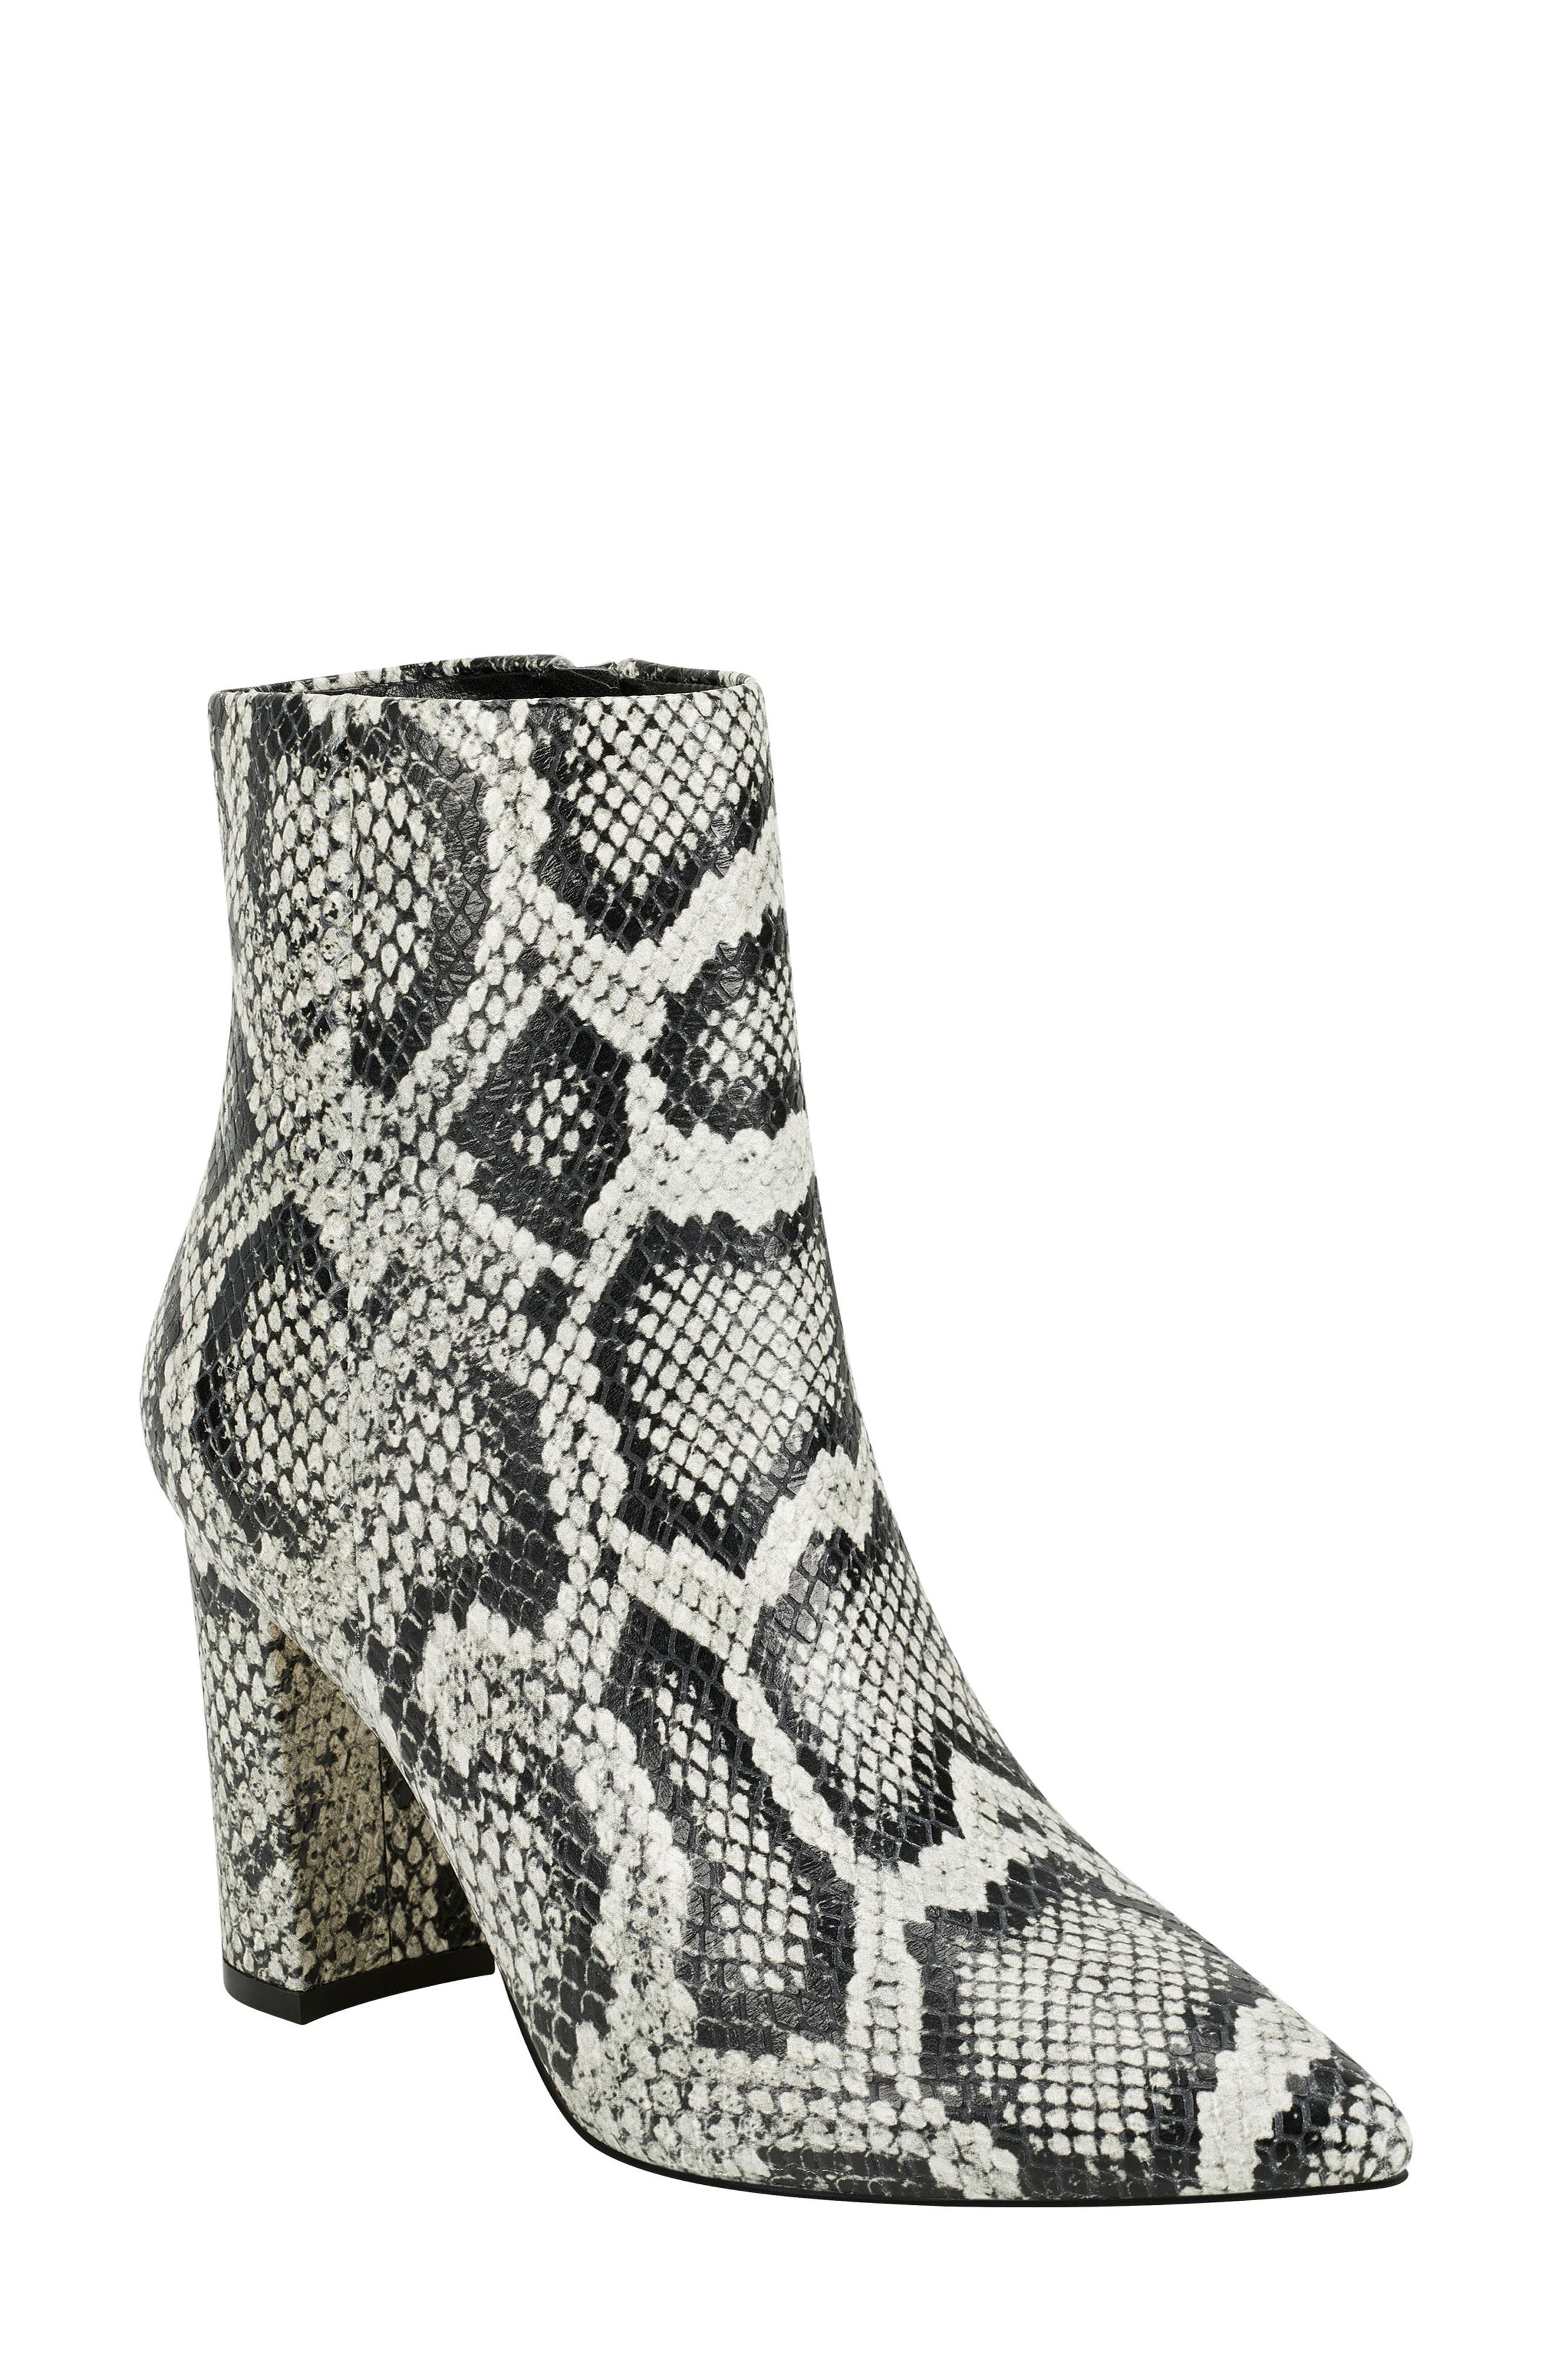 Marc Fisher Ltd Ulani Embossed Pointed Bootie In Grey Multi Leather